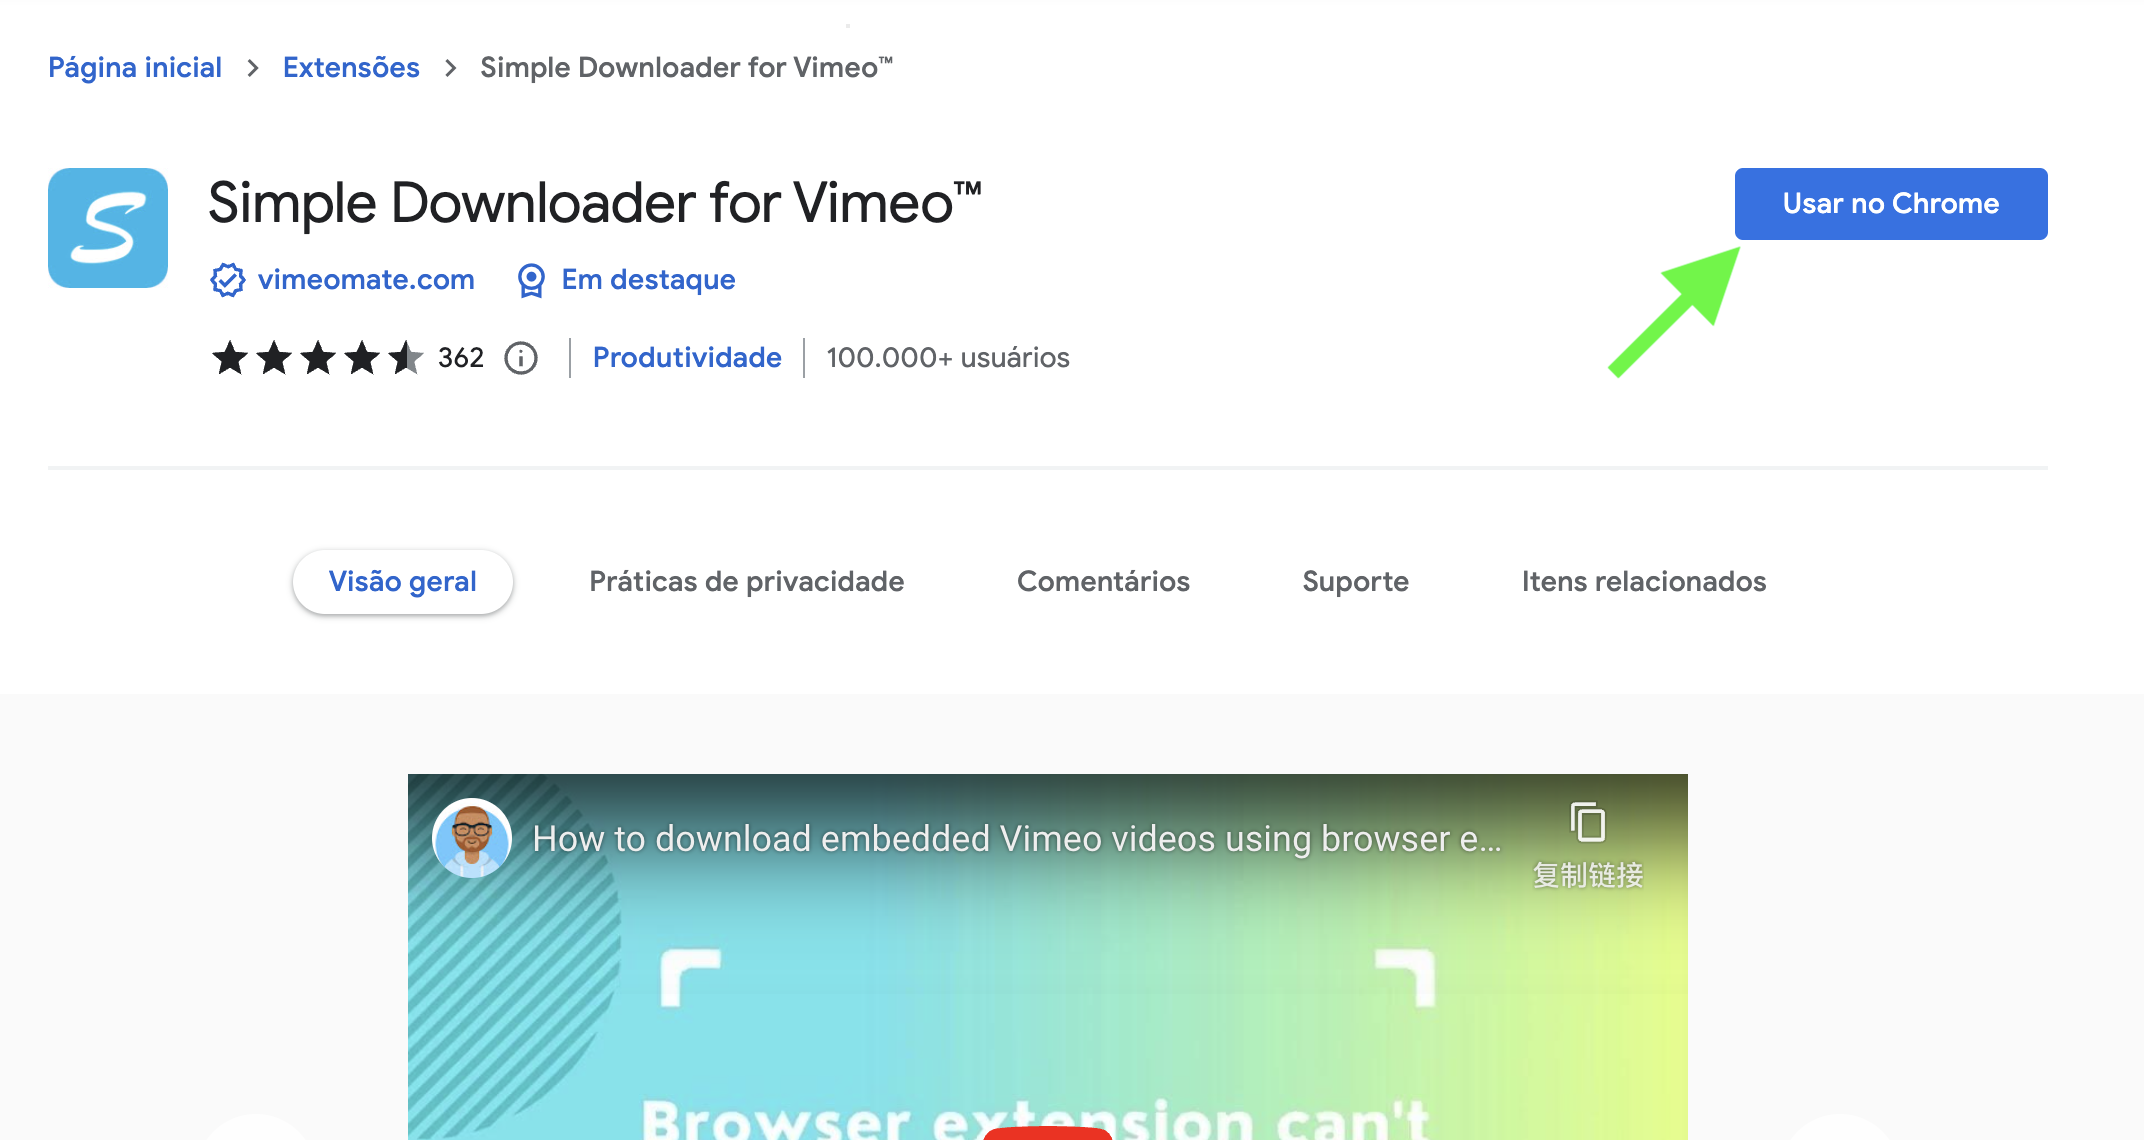 Once the extension is installed, follow these steps to download a Vimeo video.